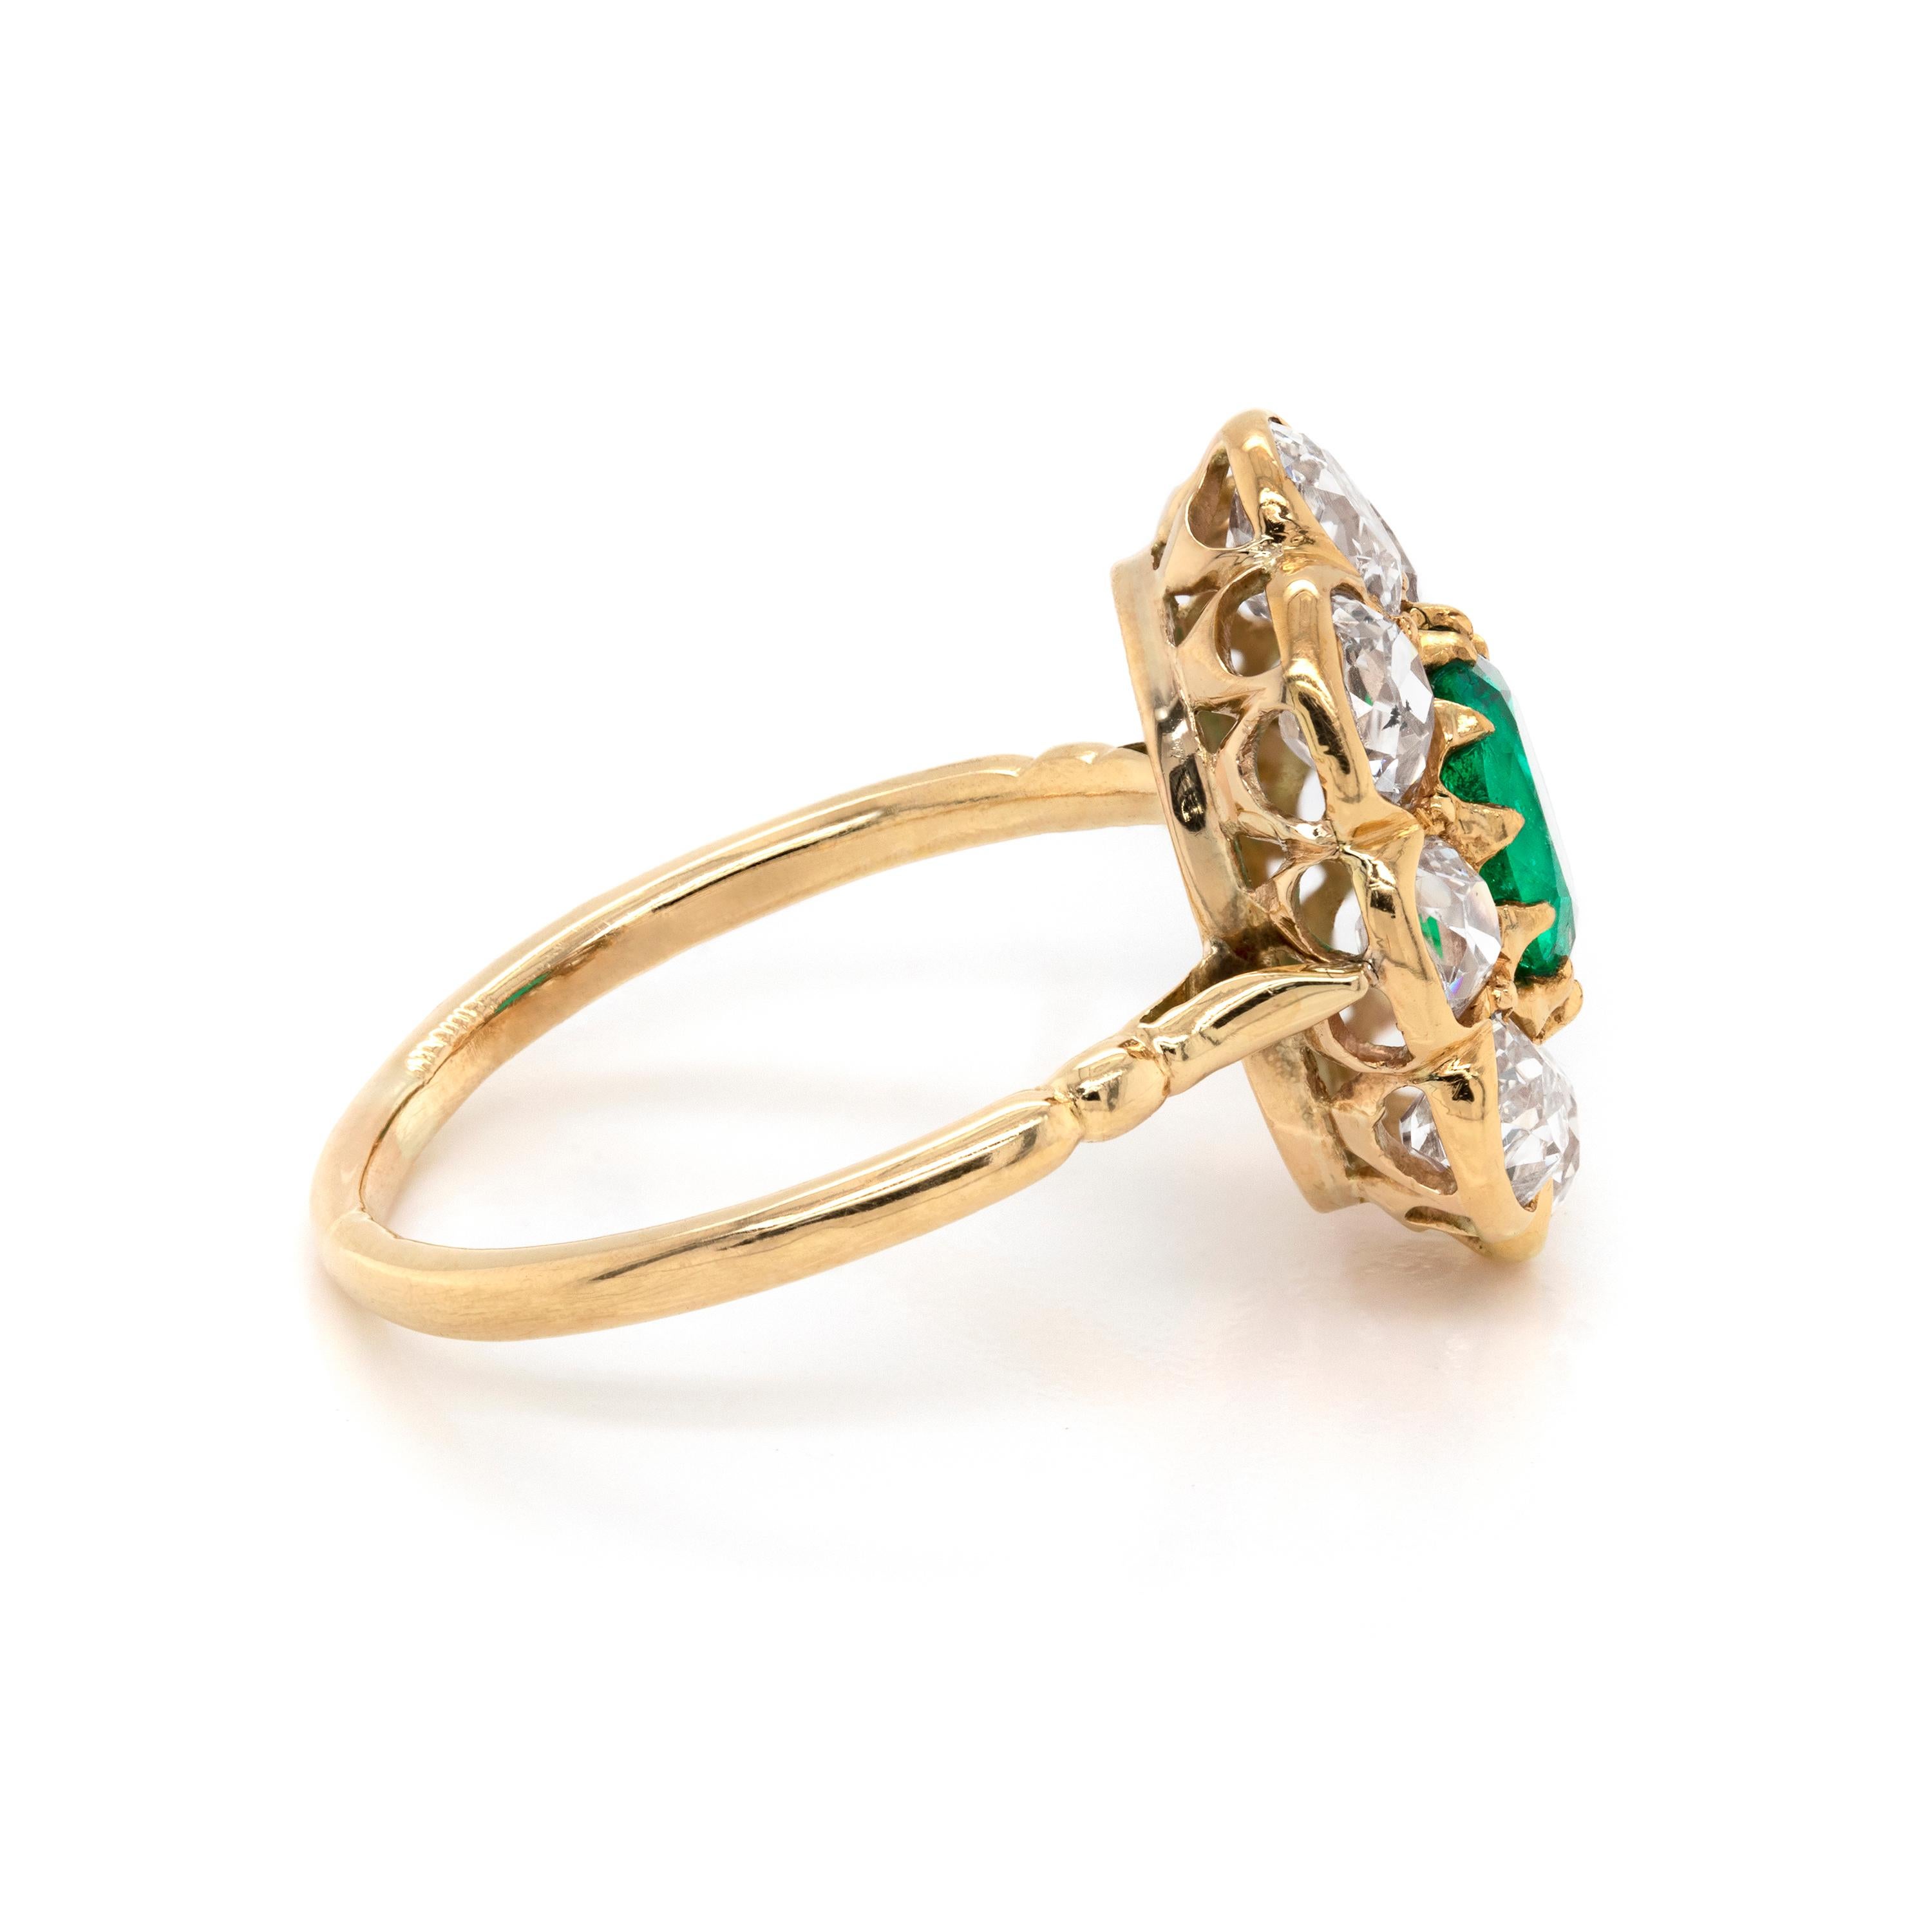 Natural emerald and diamond cluster ring featuring an oval shaped vibrant emerald in the center mounted an open back claw setting with an approximate weight of 1.00 carat. The emerald is beautifully surrounded by eight old cut diamonds in open back